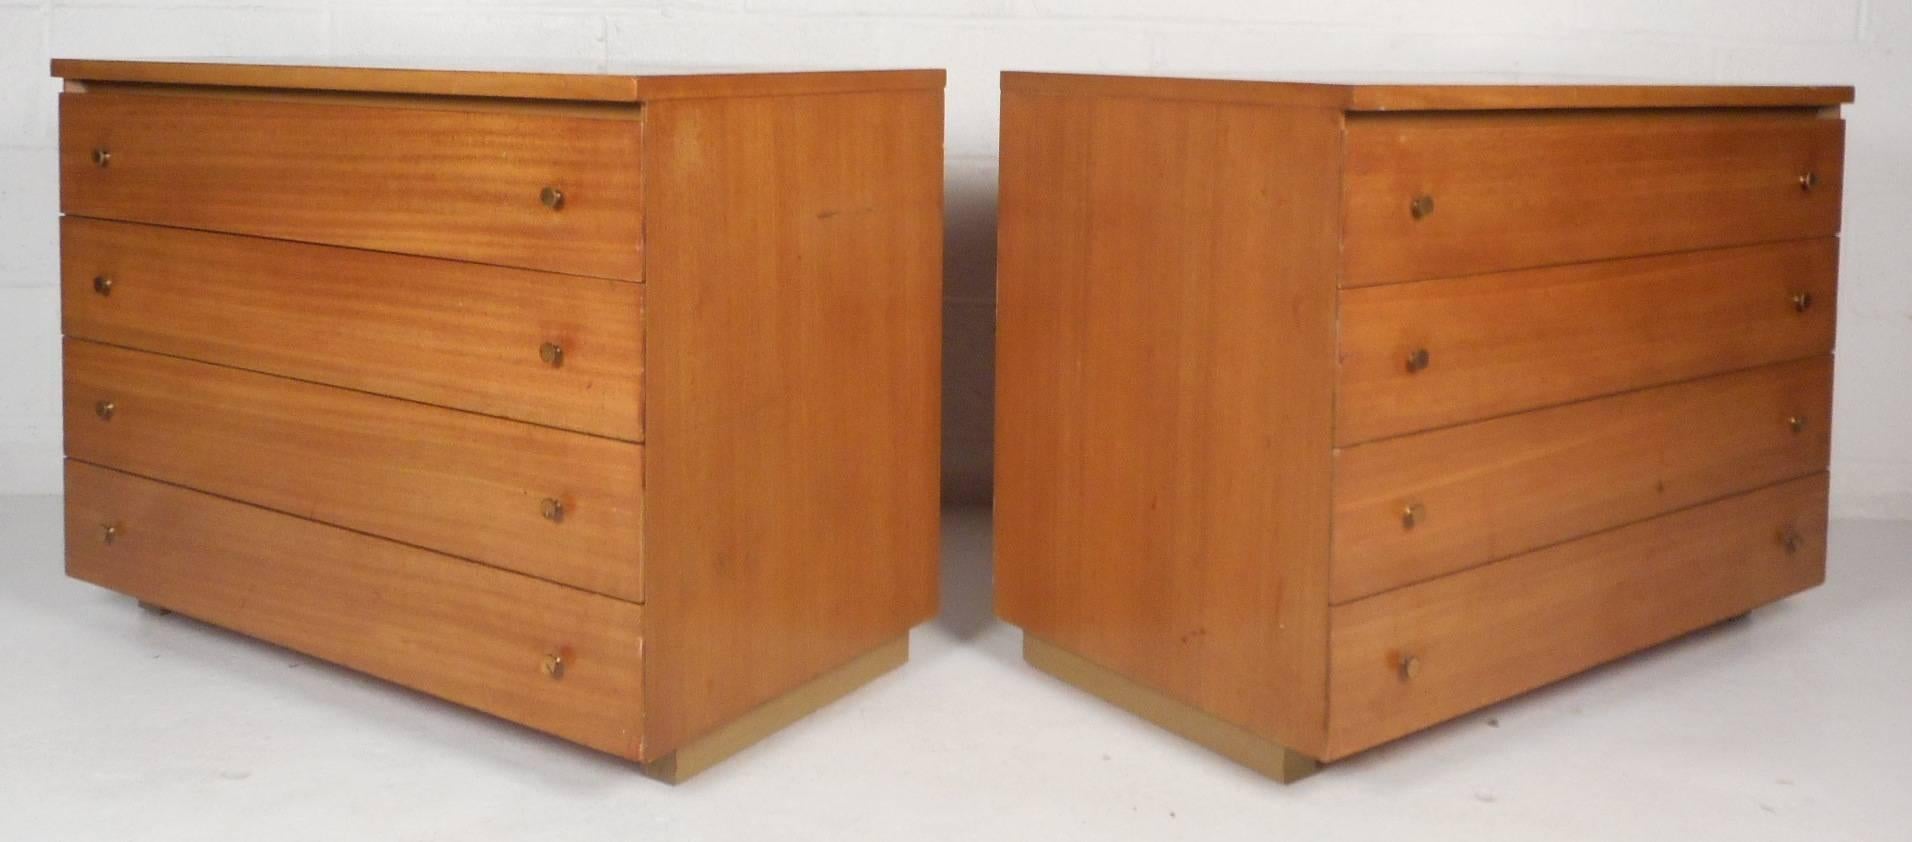 Beautiful vintage modern pair of dressers feature plenty of room for storage within its eight hefty drawers combined. Elegant maple wood grain, unique brass pulls and a finished back show quality craftsmanship. Sleek and sturdy design with unusual